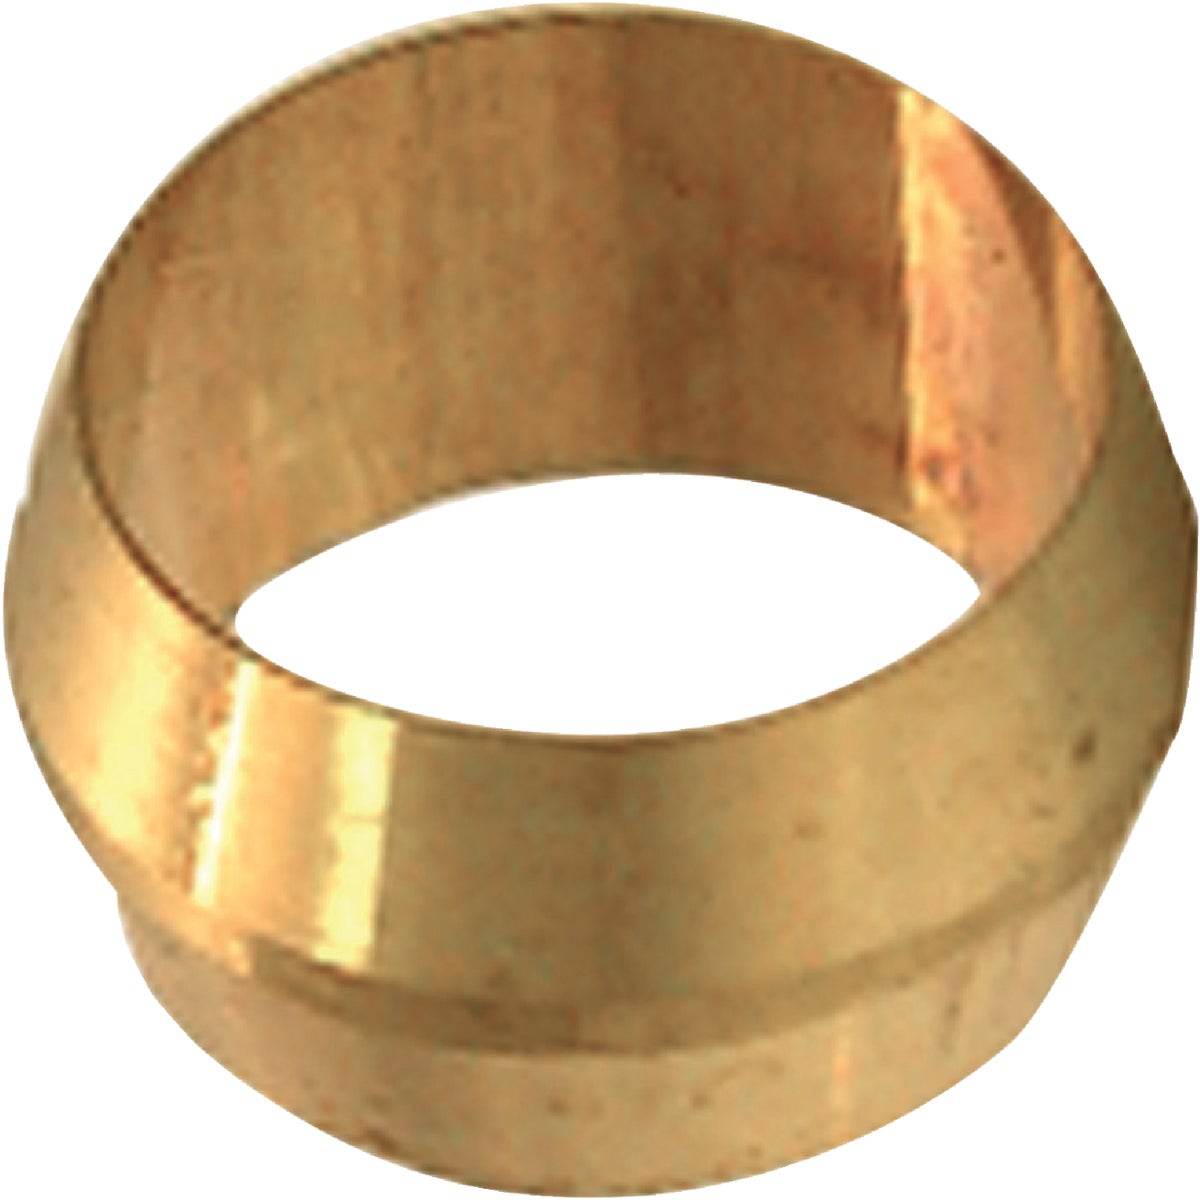 Lasco 1/8 In. Brass Compression Sleeve (2-Pack)